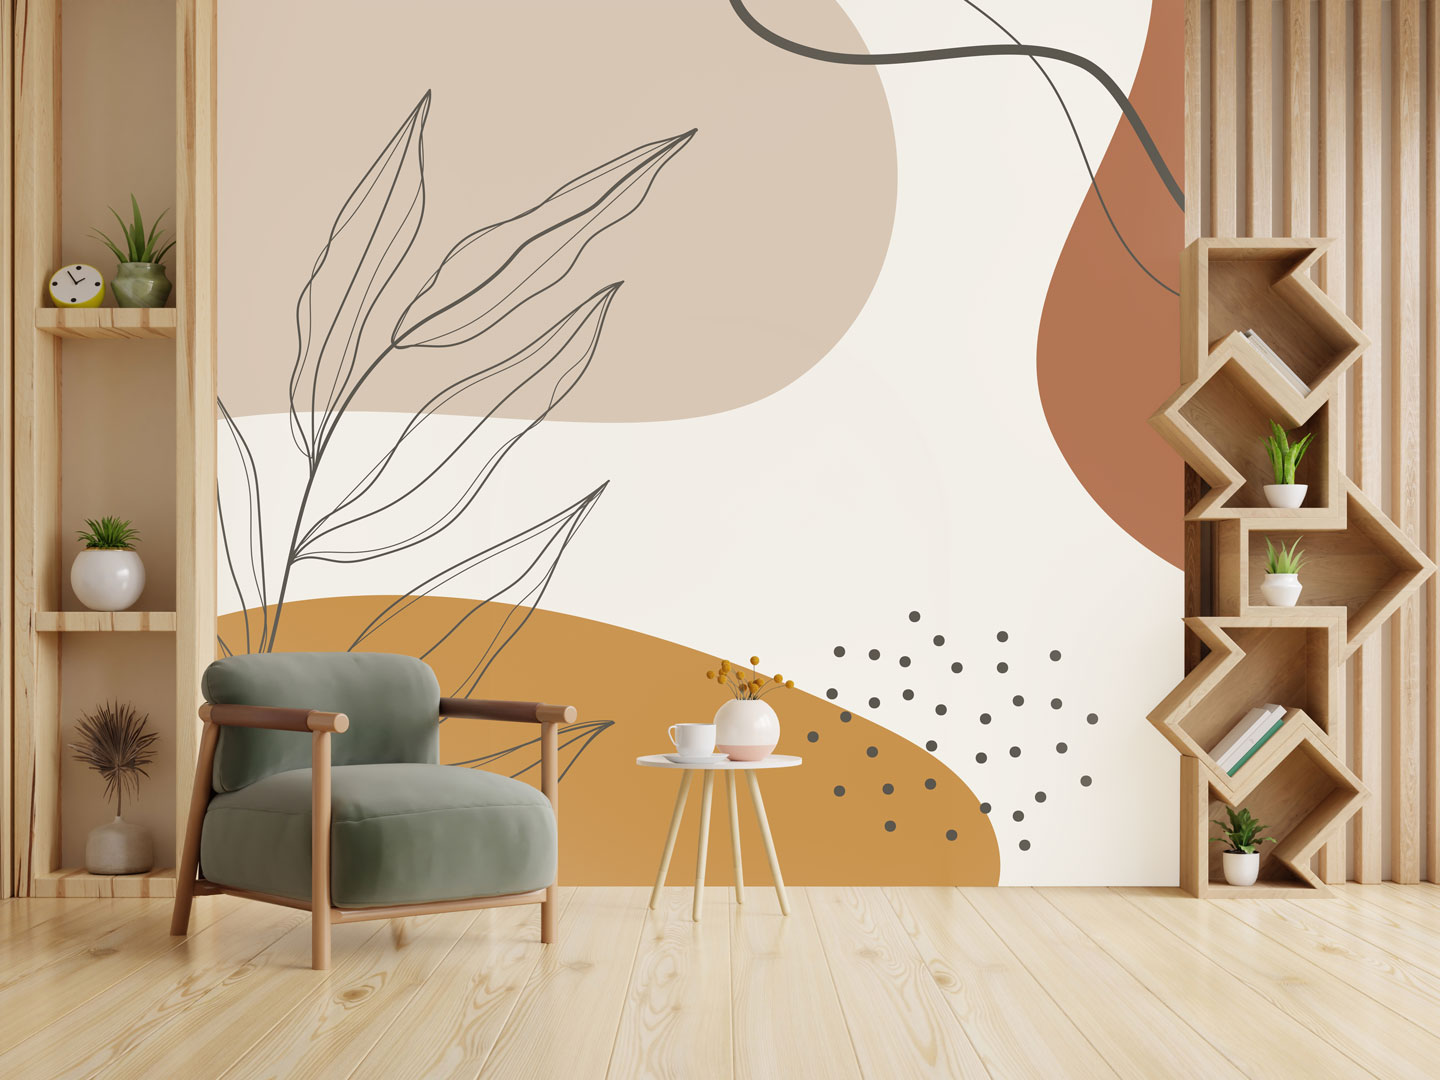 Abstract wallpaper, branch in browns and dots on a cream background, boho style - Dekoori image 2